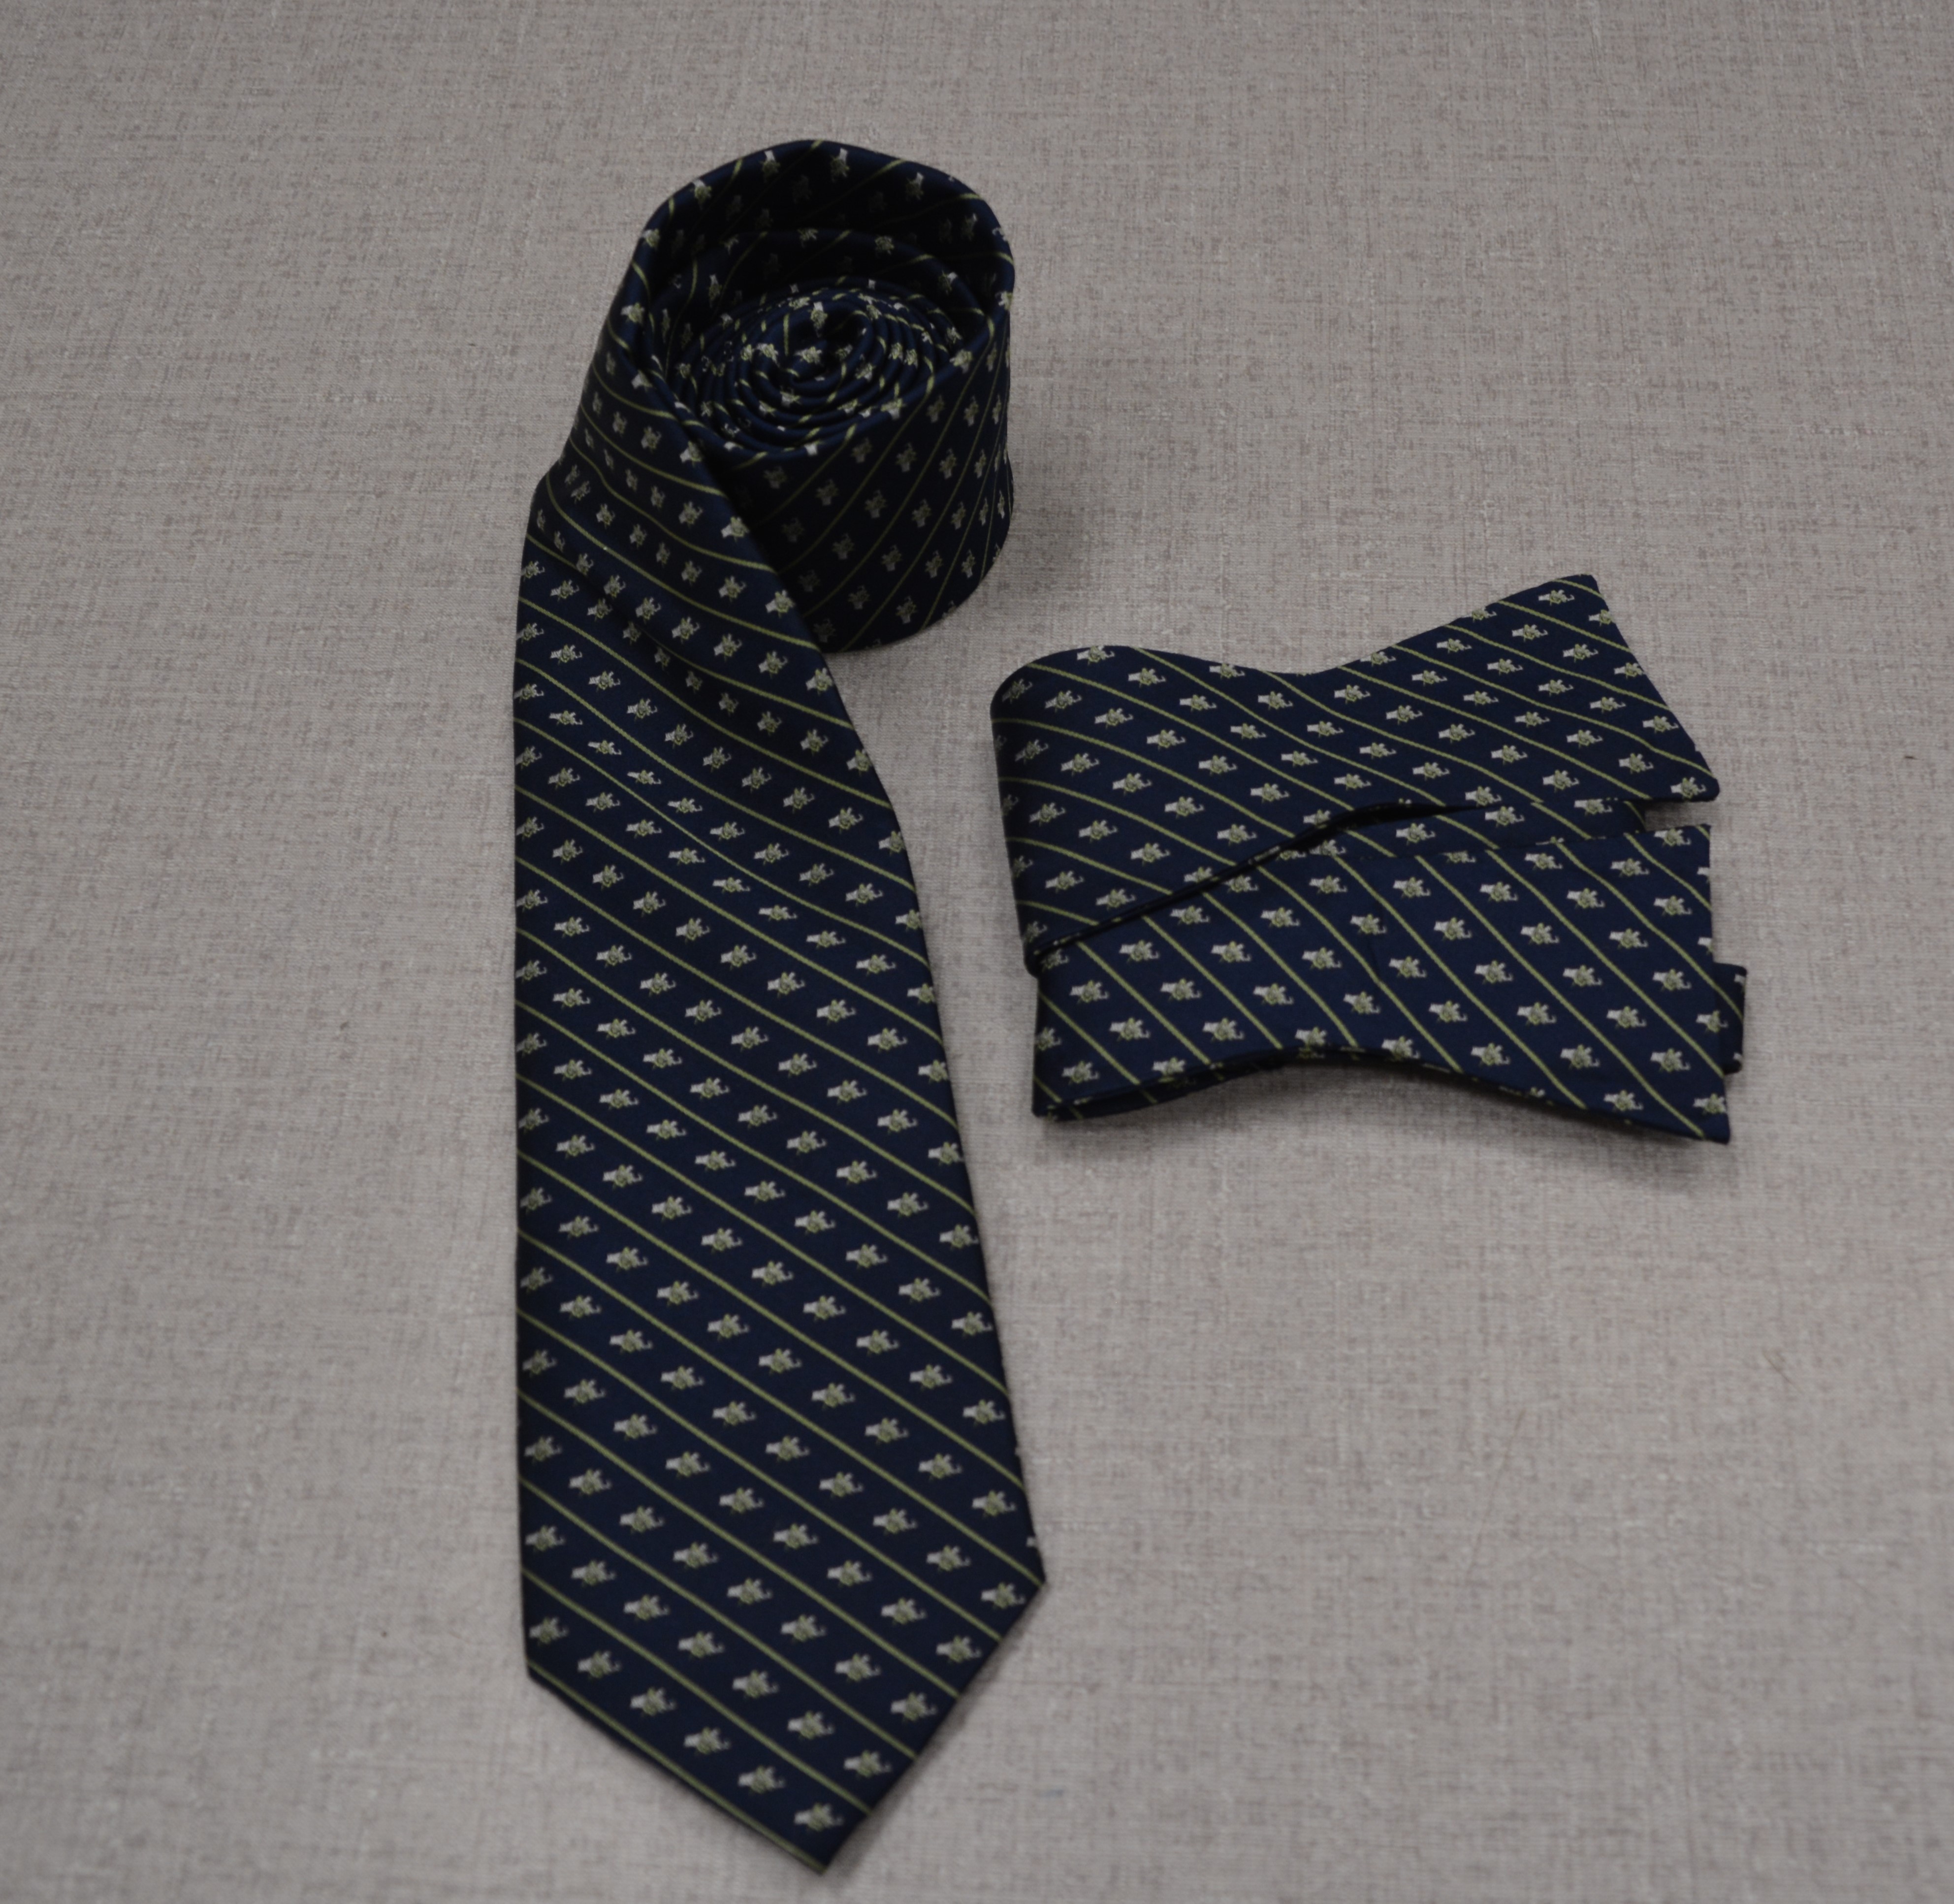 How to Tie a Bow Tie - Get Yours Today! - Massachusetts Freemasons